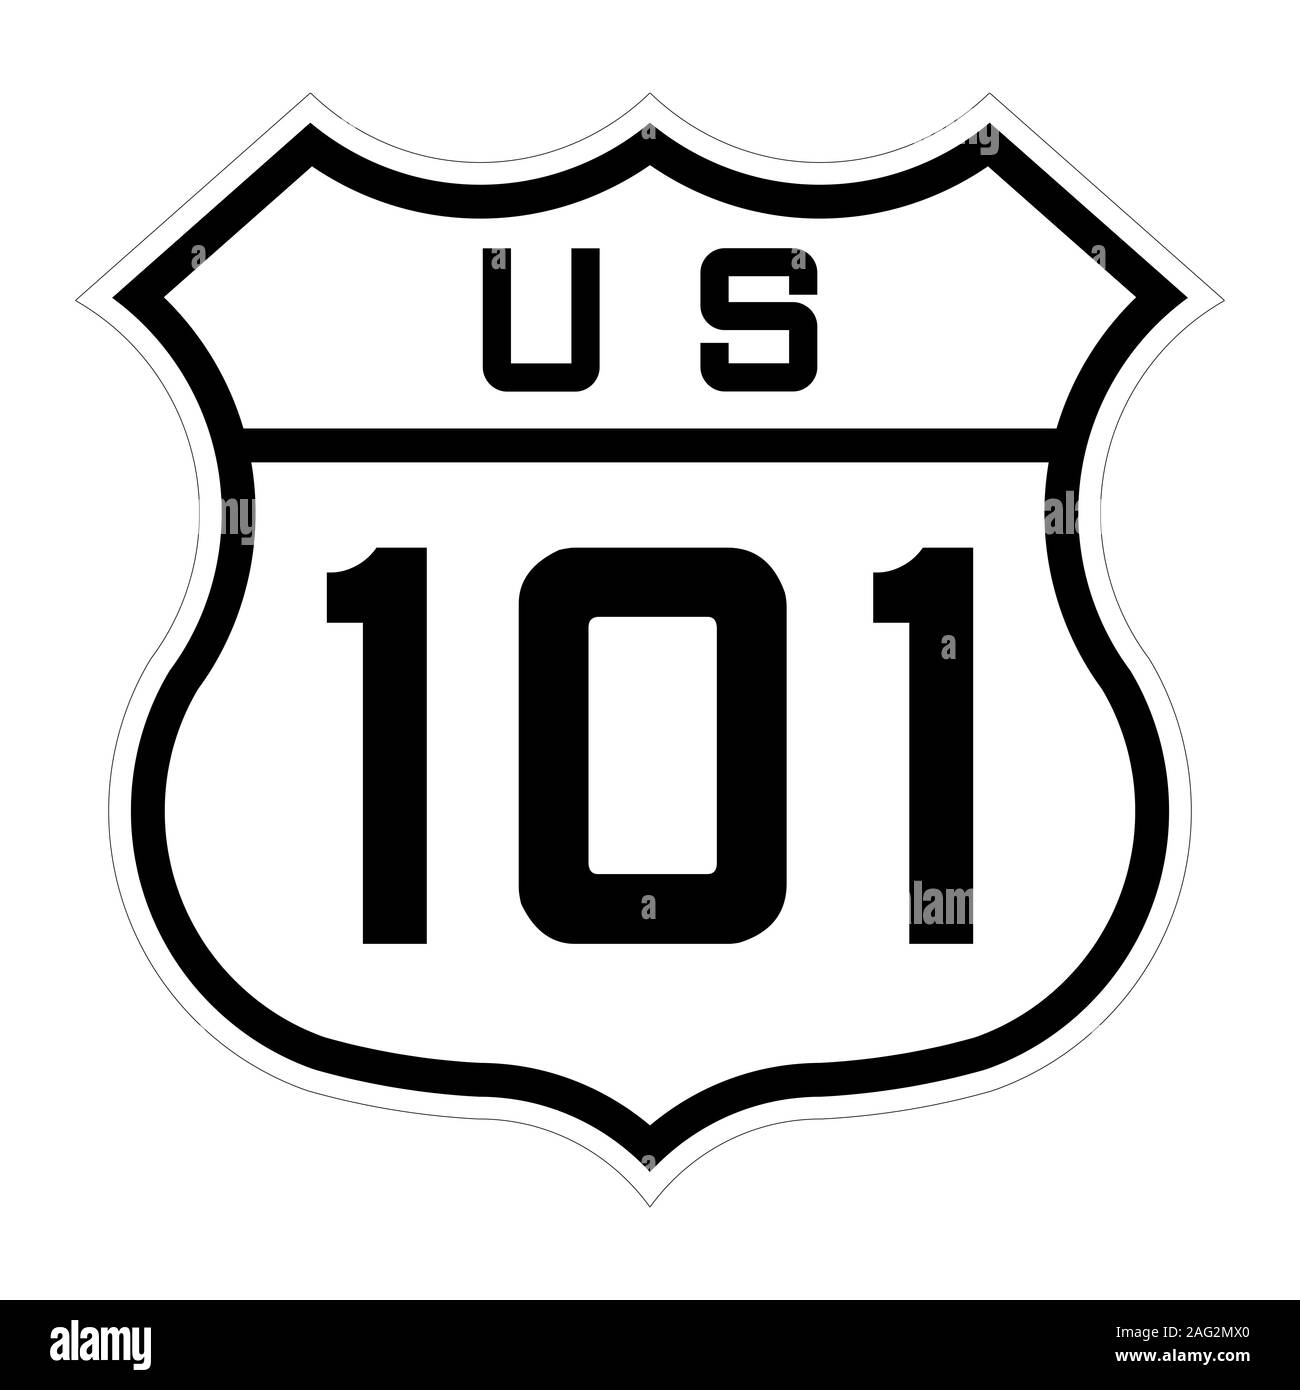 US route 101 sign Stock Photo